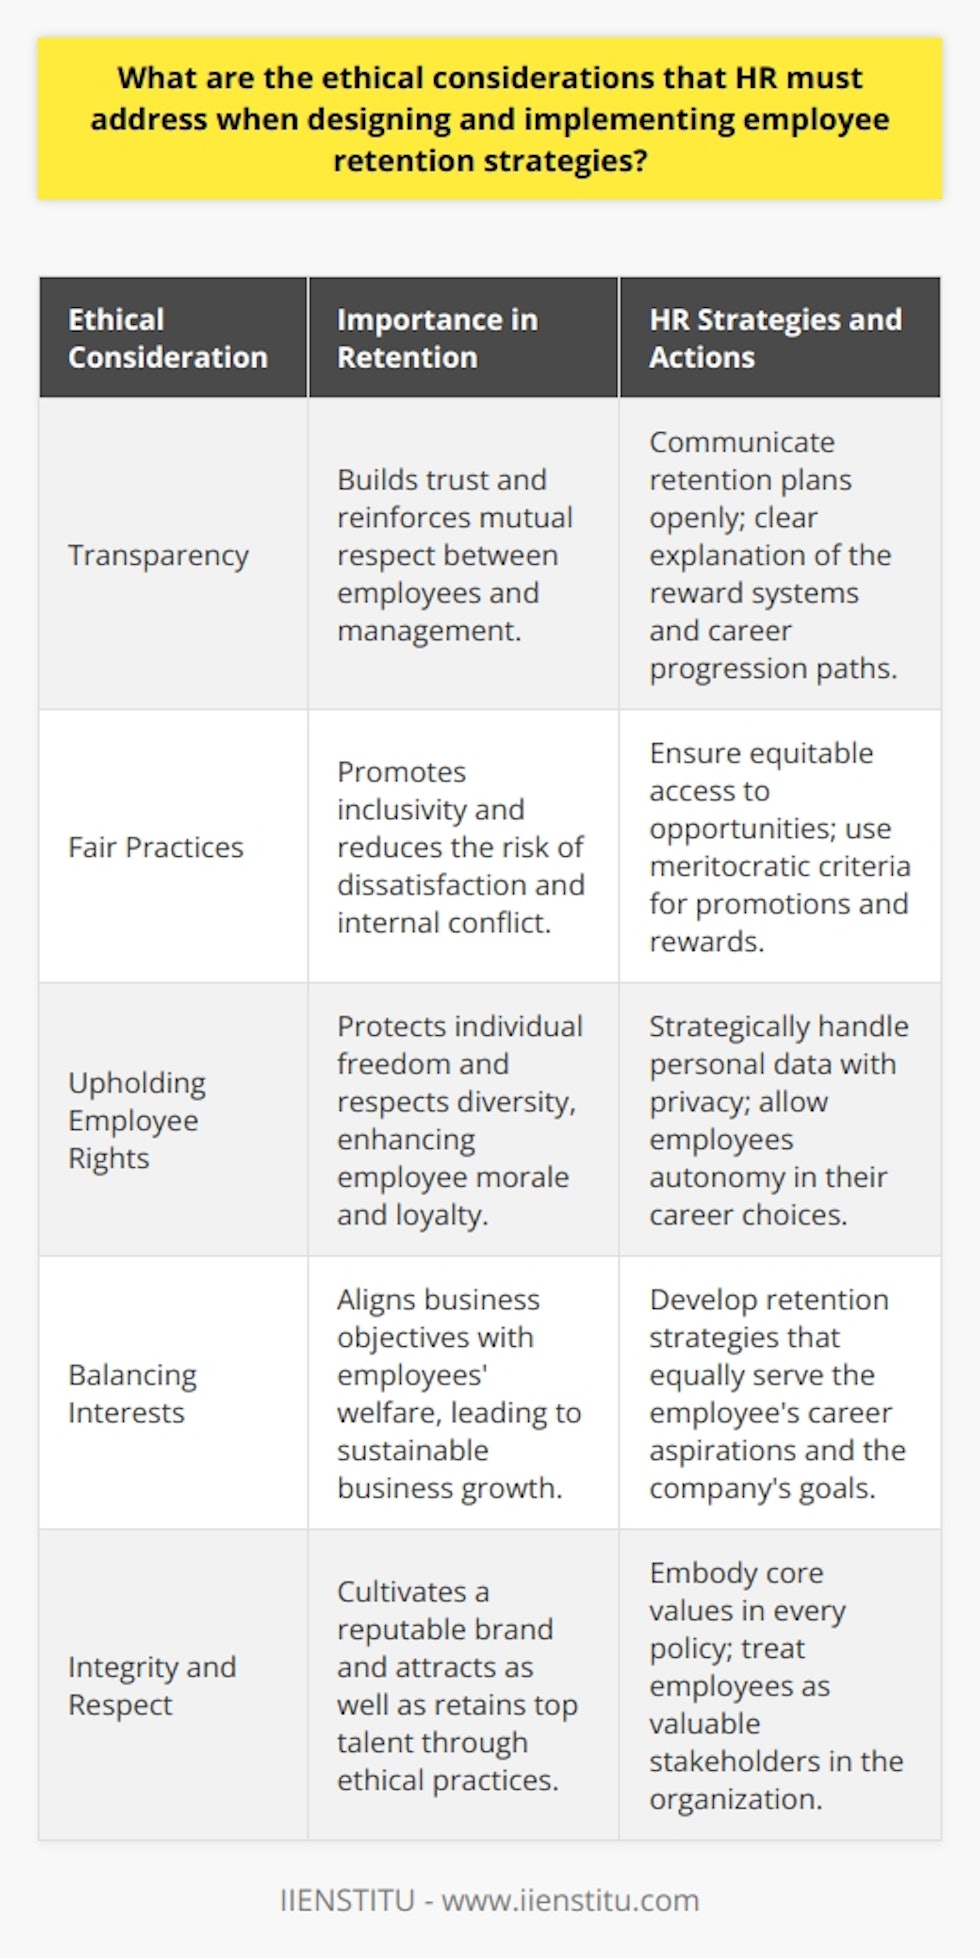 Ethical Considerations in Employee Retention Strategies by HRHuman Resource (HR) departments are pivotal in shaping the fabric of an organization by developing policies that impact the workforce directly. One such area of influence is employee retention strategies, where ethical considerations are paramount to fostering a workplace that values its employees and operates with integrity.Transparency as the Bedrock of TrustTransparency is critical in all HR initiatives, particularly in employee retention strategies. HR must ensure that the plans designed to retain staff are shared with clarity and purpose. Employees should know the criteria used for rewarding loyalty, performance, and potential. They must be informed of the systems in place that affect their career progression. Open dialogues about retention approaches allow employees to feel included and valued, subsequently nurturing a culture of trust.Fair Practices for InclusivityFairness must be a non-negotiable aspect of all HR policies. Employee retention strategies must include equitable access to development programs, promotions, and rewards, avoiding preferential treatment. By fostering an environment where fairness is a cornerstone, HR can mitigate the risks of internal conflict and dissatisfaction. Fair and meritocratic practices signal to employees that the organization respects their contributions regardless of their position or tenure.Upholding Employee RightsIn their bid to design effective retention strategies, HR must always maintain a high standard of ethics regarding individual rights. Employees' personal data must be handled with the utmost privacy, with clear policies on what information is collected and how it's used. Respecting autonomy and diversity is equally important; recognizing that while retention is the goal, it should never come at the cost of employee freedom to make career decisions or maintain work-life boundaries.Balancing Ethical Engagement with Business GoalsEmployee retention strategies should reflect a delicate balance between the interests of the company and the well-being of the workforce. Ethical retention means aligning business objectives with genuine care for employees' growth, security, and satisfaction. Strategies which enhance the loyalty and longevity of staff through ethical practices are a testament to an organization's integrity and humanistic approach to business.In crafting employee retention strategies, HR professionals need to embody the values of integrity, fairness, and respect. Organizations that succeed in this approach are often those that view their workforce not just as cogs in a machine, but as human beings deserving of sincere investment and ethical treatment. Such an ethos not only helps in retaining talent but also paves the way for creating a reputable brand, one that stands for its values as much as it does for its products or services.